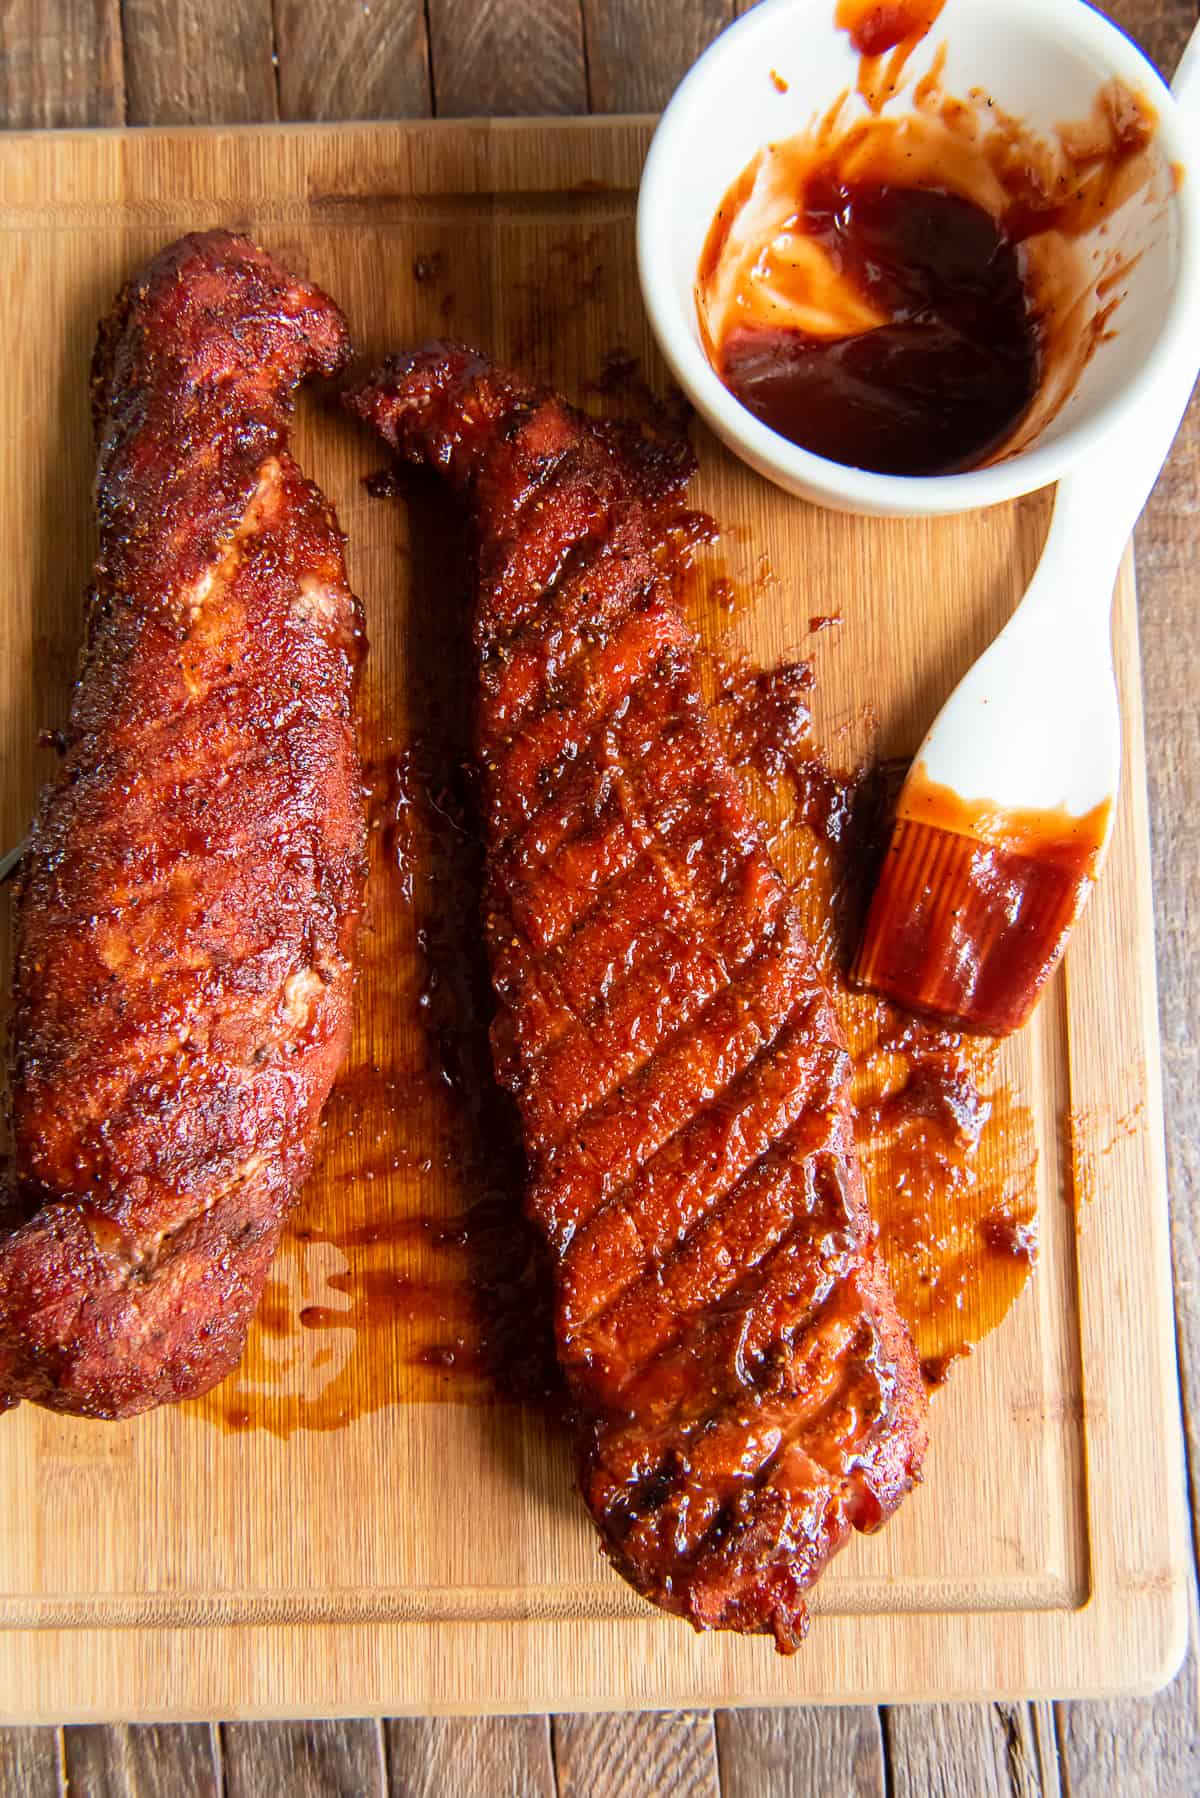 Two smoked pork tenderloins on a cutting board with a bowl of barbecue sauce.